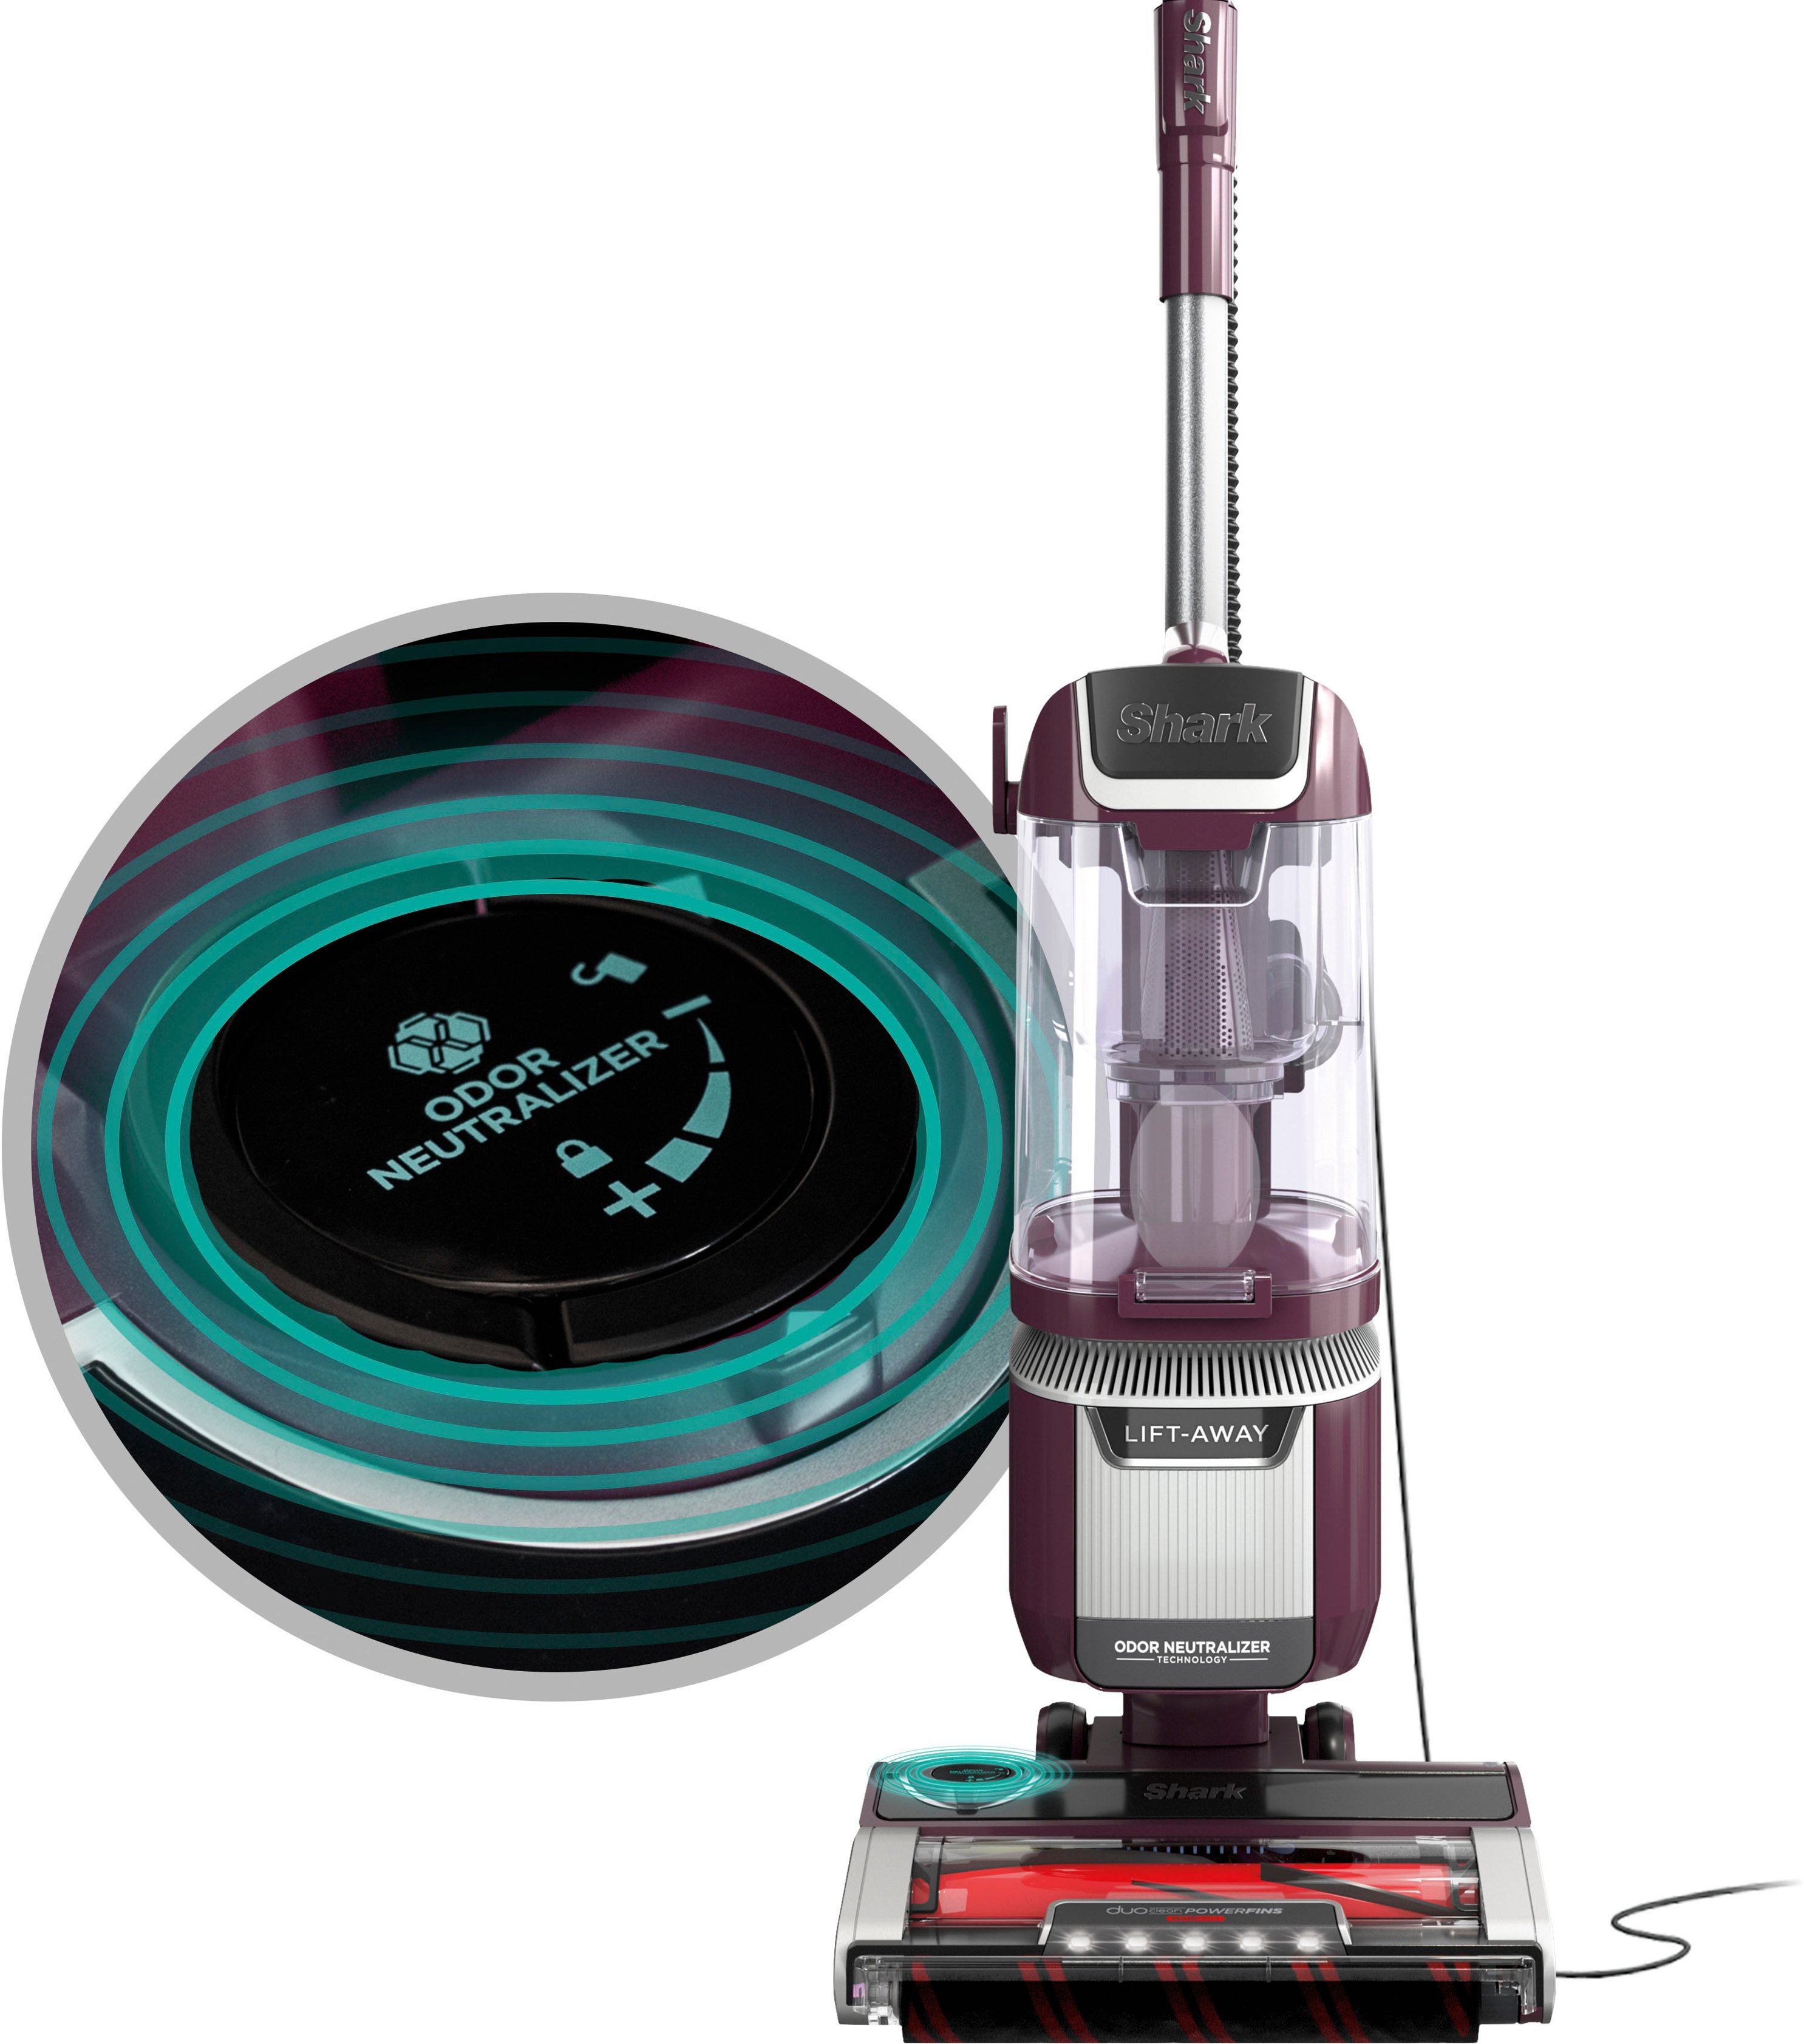 Angle View: Shark - Rotator Pet Lift-Away ADV Upright Vacuum with DuoClean PowerFins HairPro and Odor Neutralizer Technology - Wine Purple